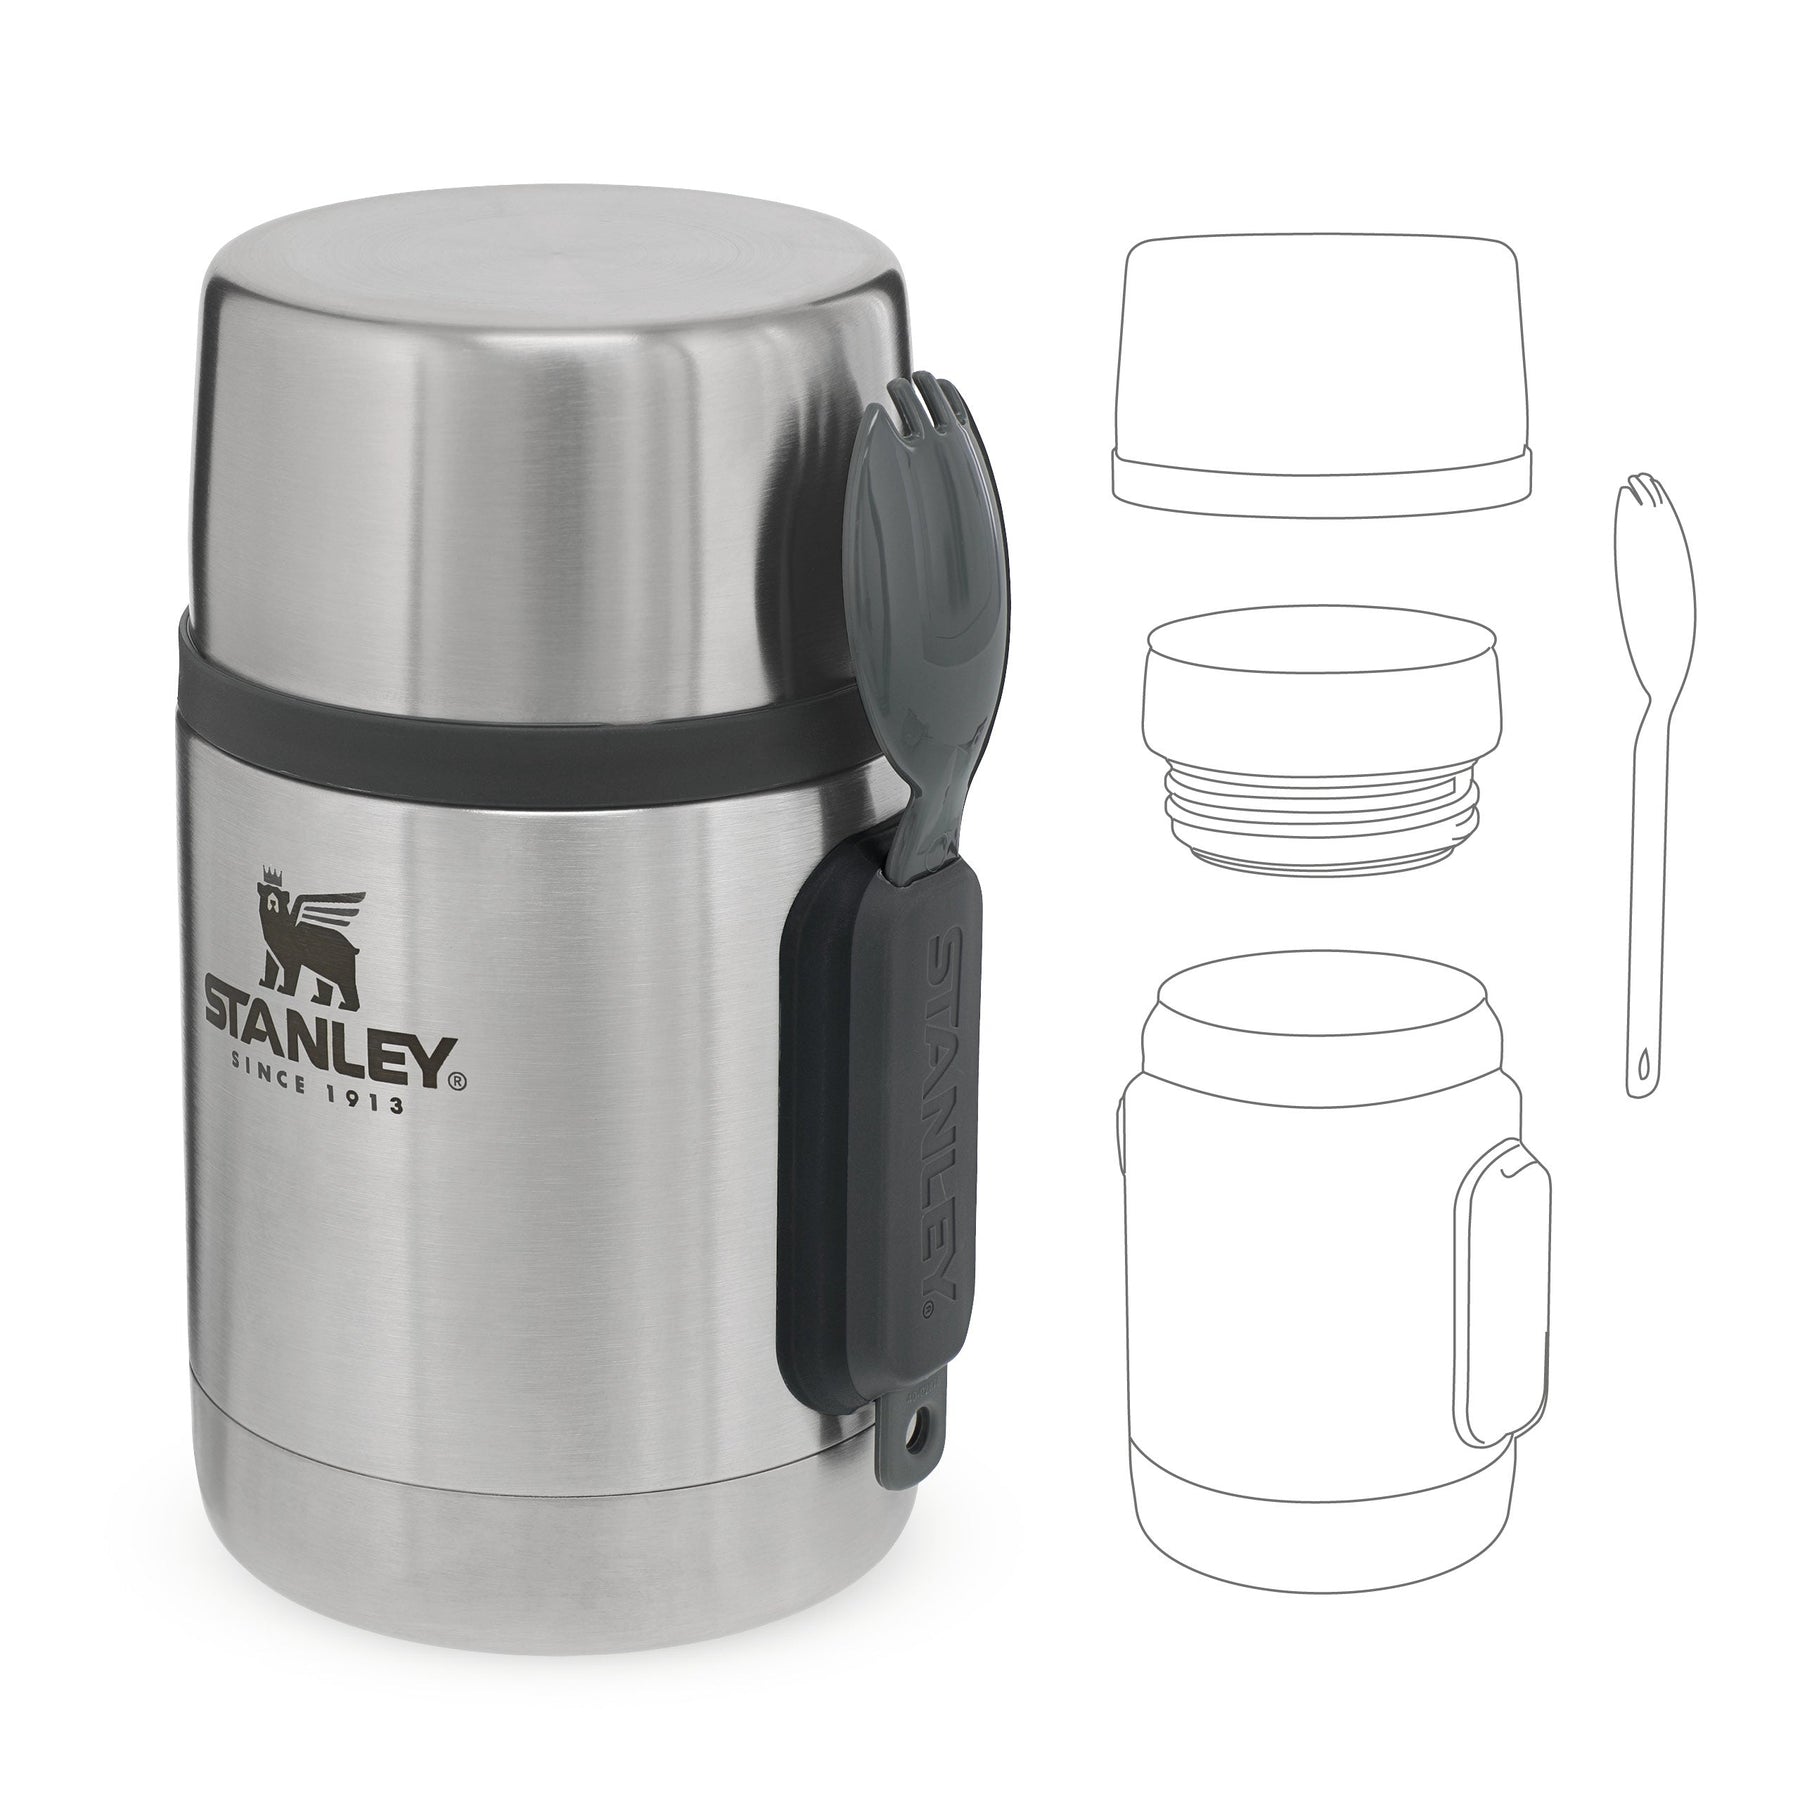 Stanley Classic Stainless Steel Thermos Vacuum Food Jar 17oz Camping Cold  Hot